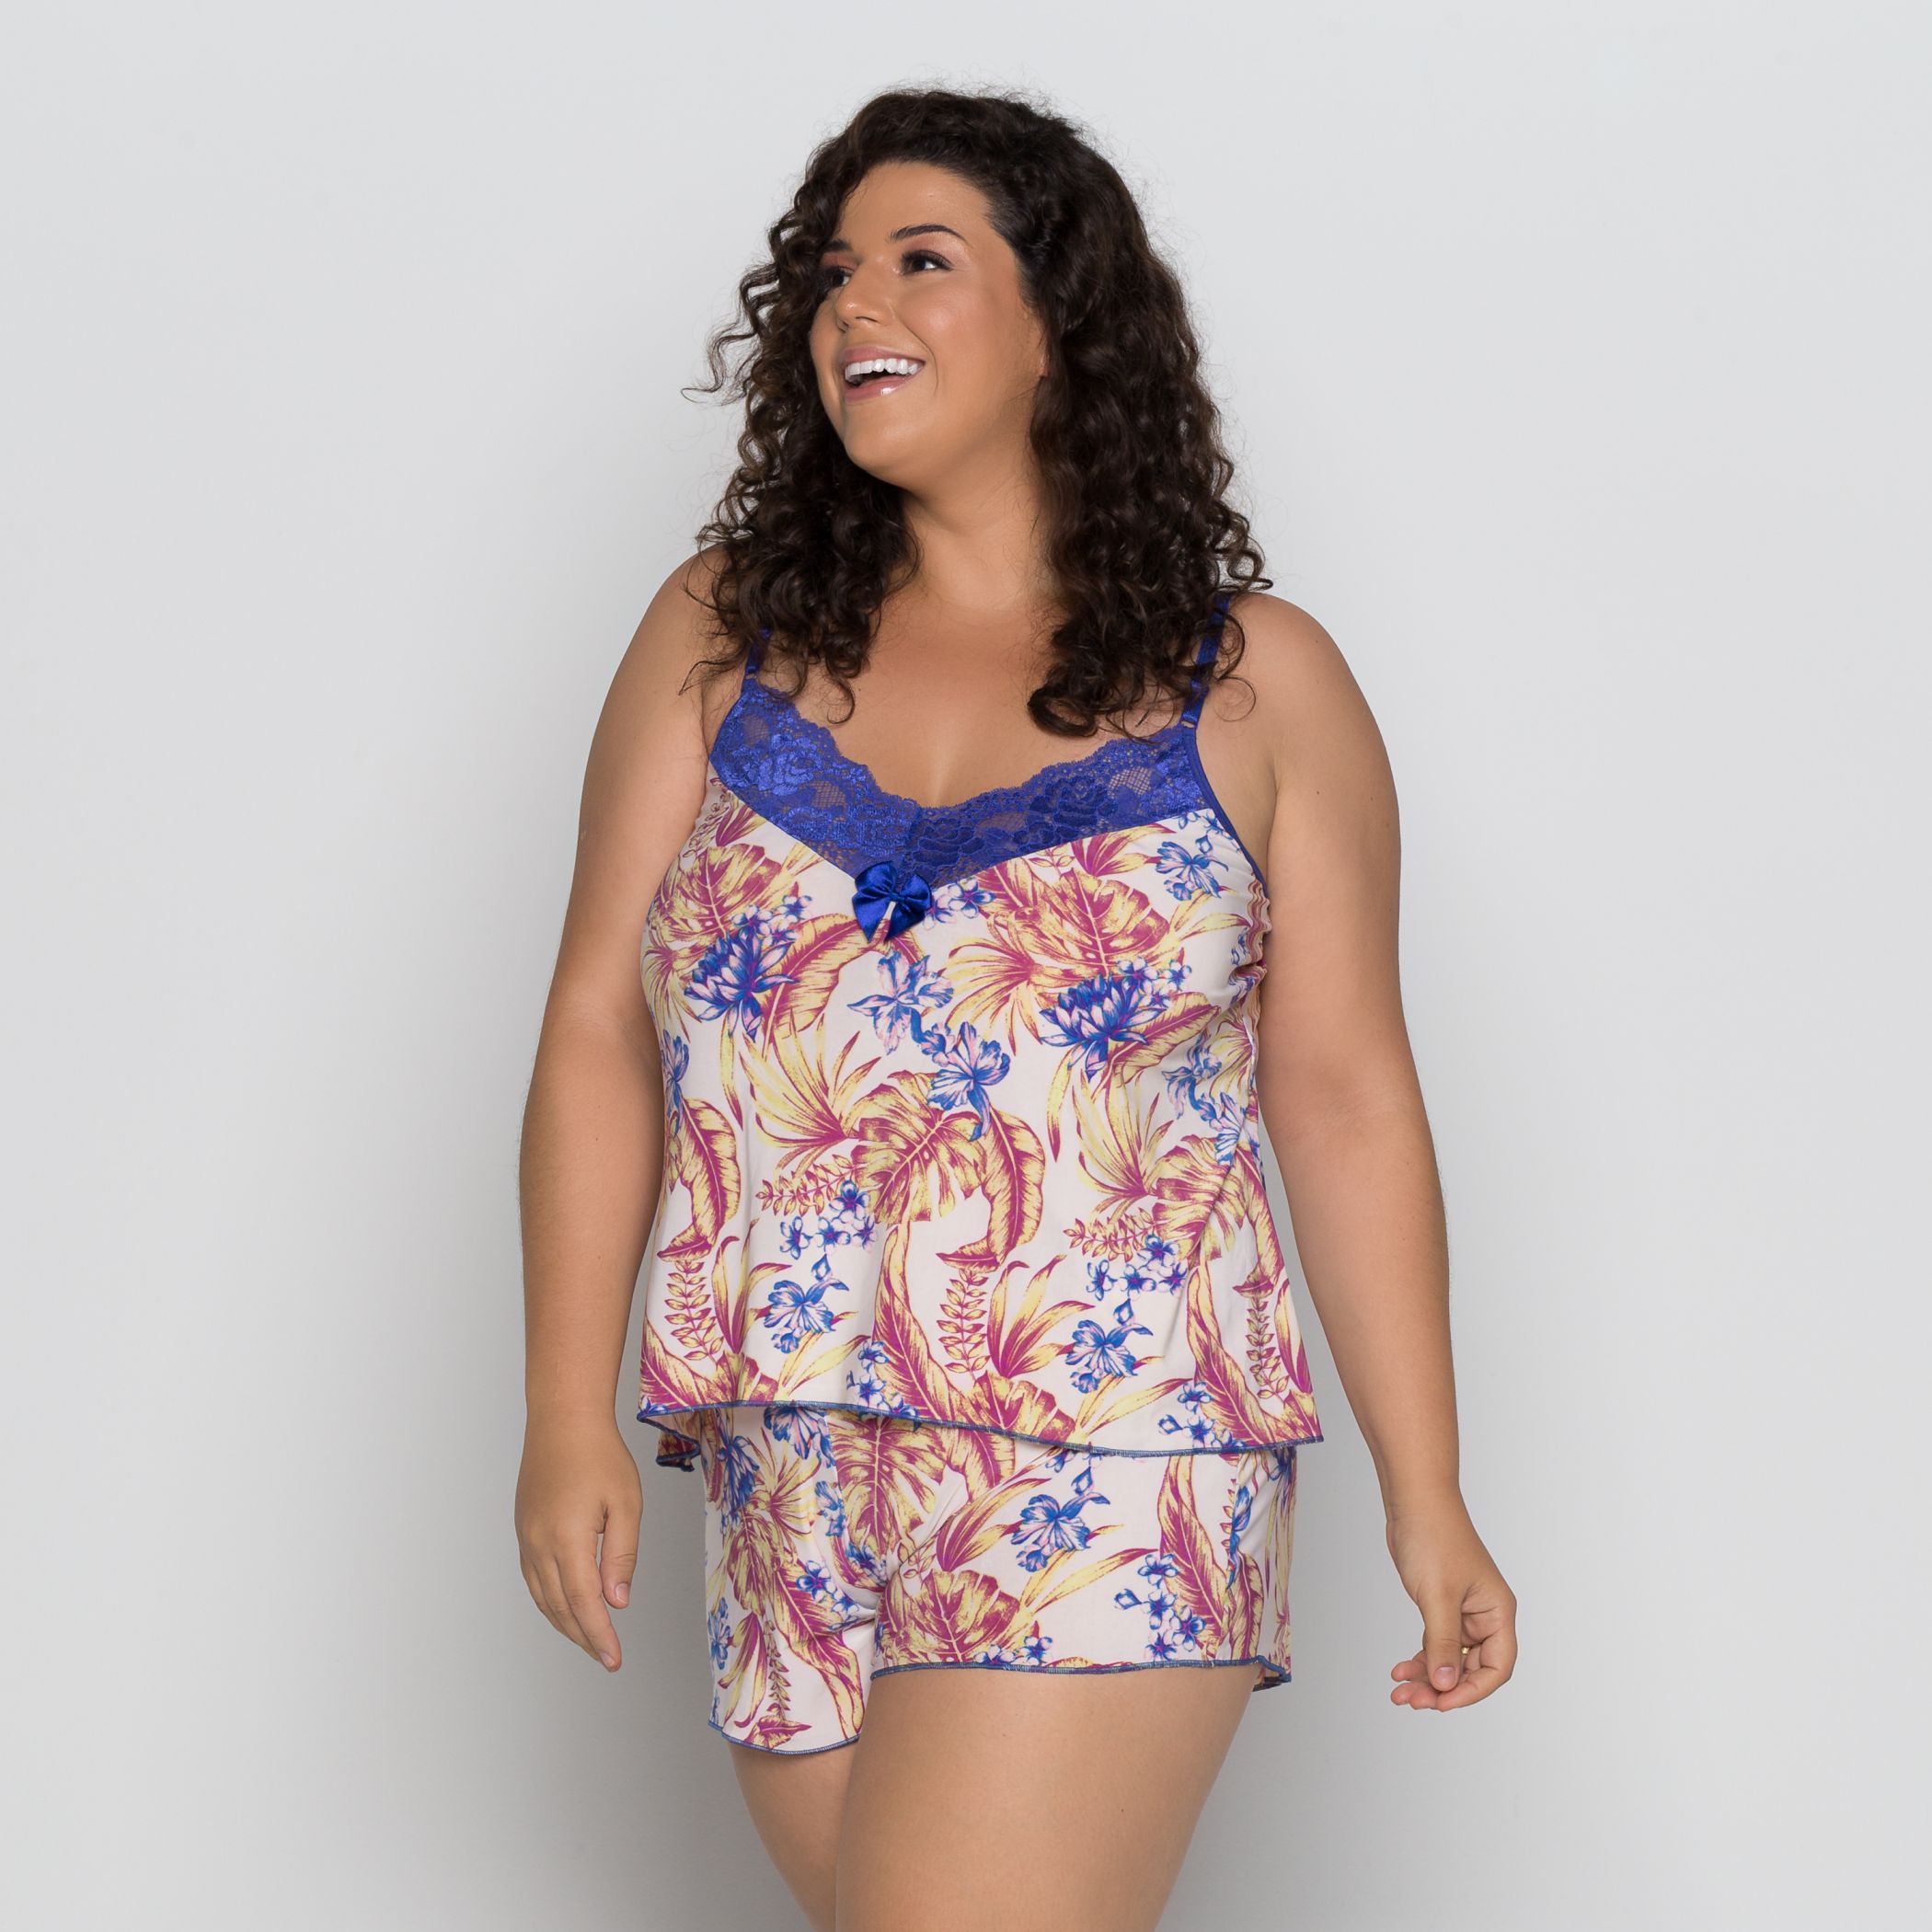 apprentice pageant dry Short Doll Plus Size Liganete - Clube Íntima